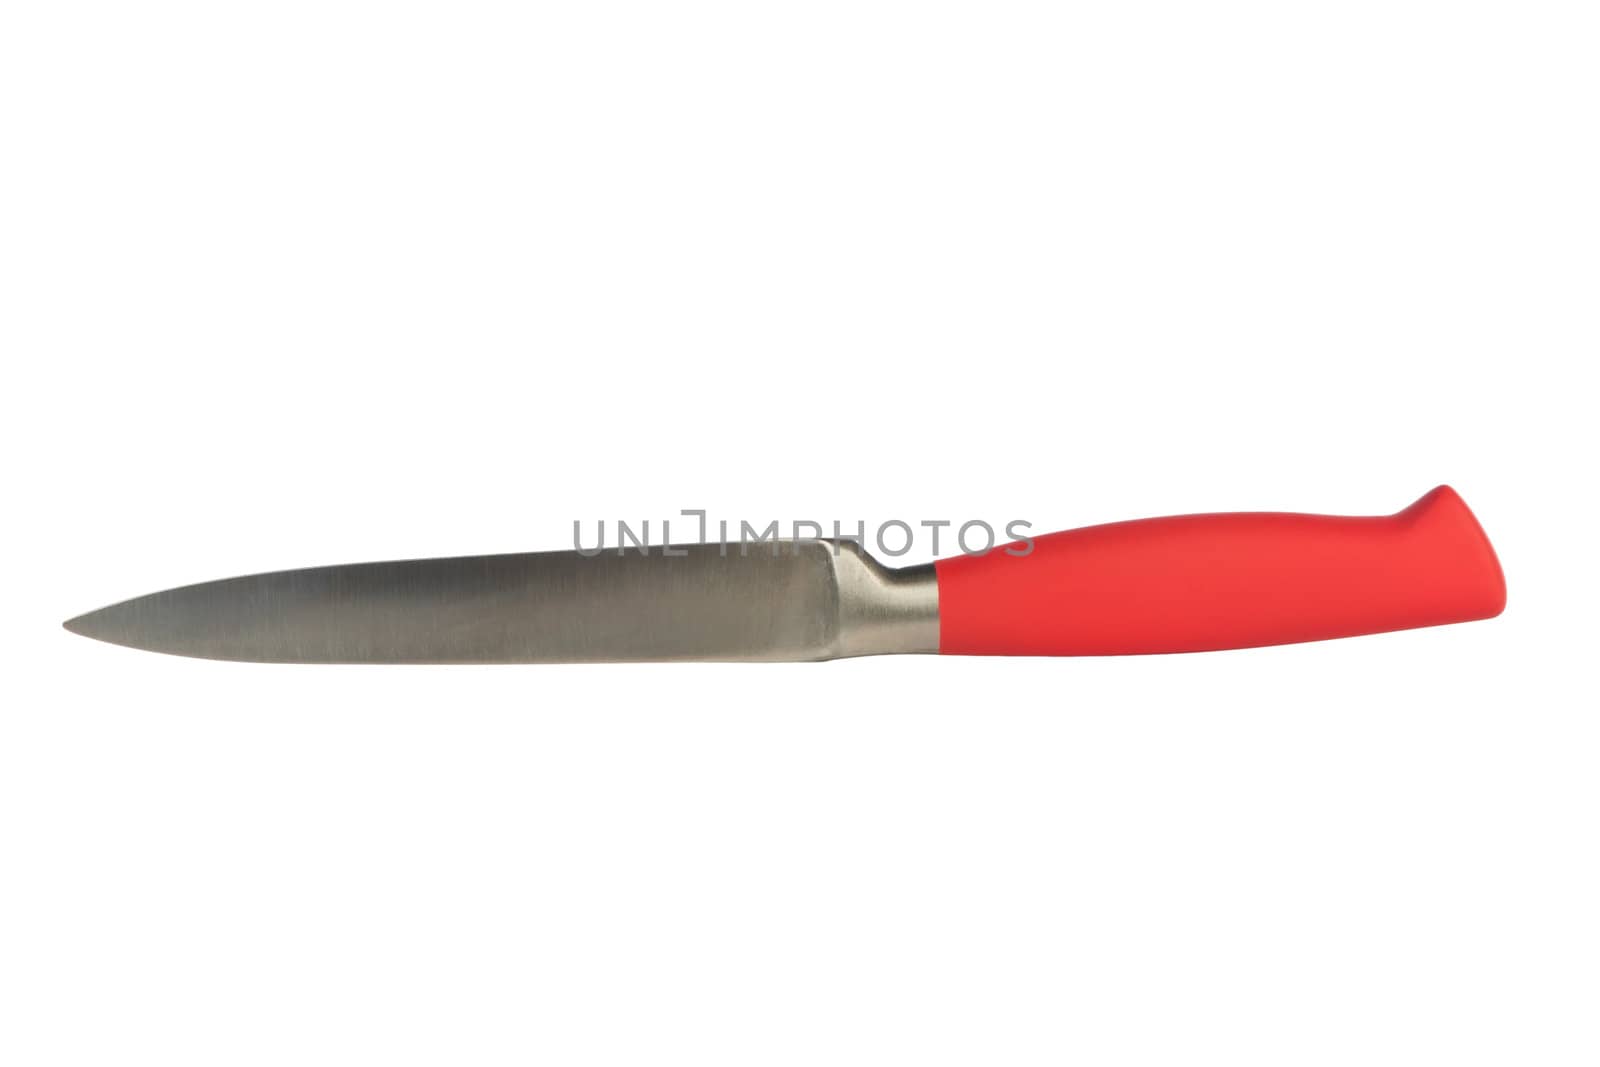 A sharp steak knife isolated on white background with red handle. 